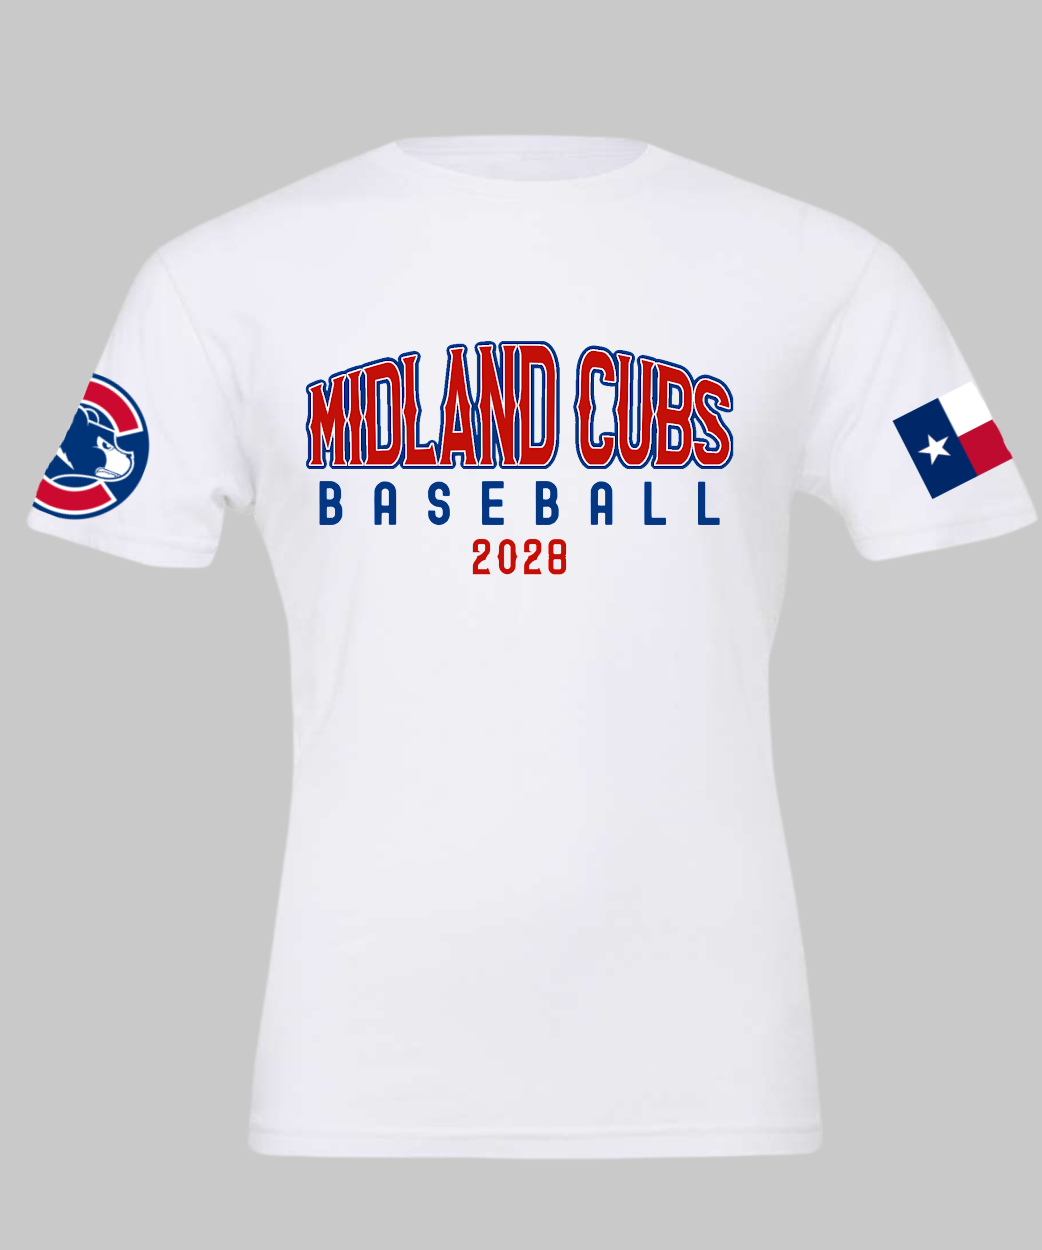 Dry Fit or Bella Canvas Midland Cubs Tee